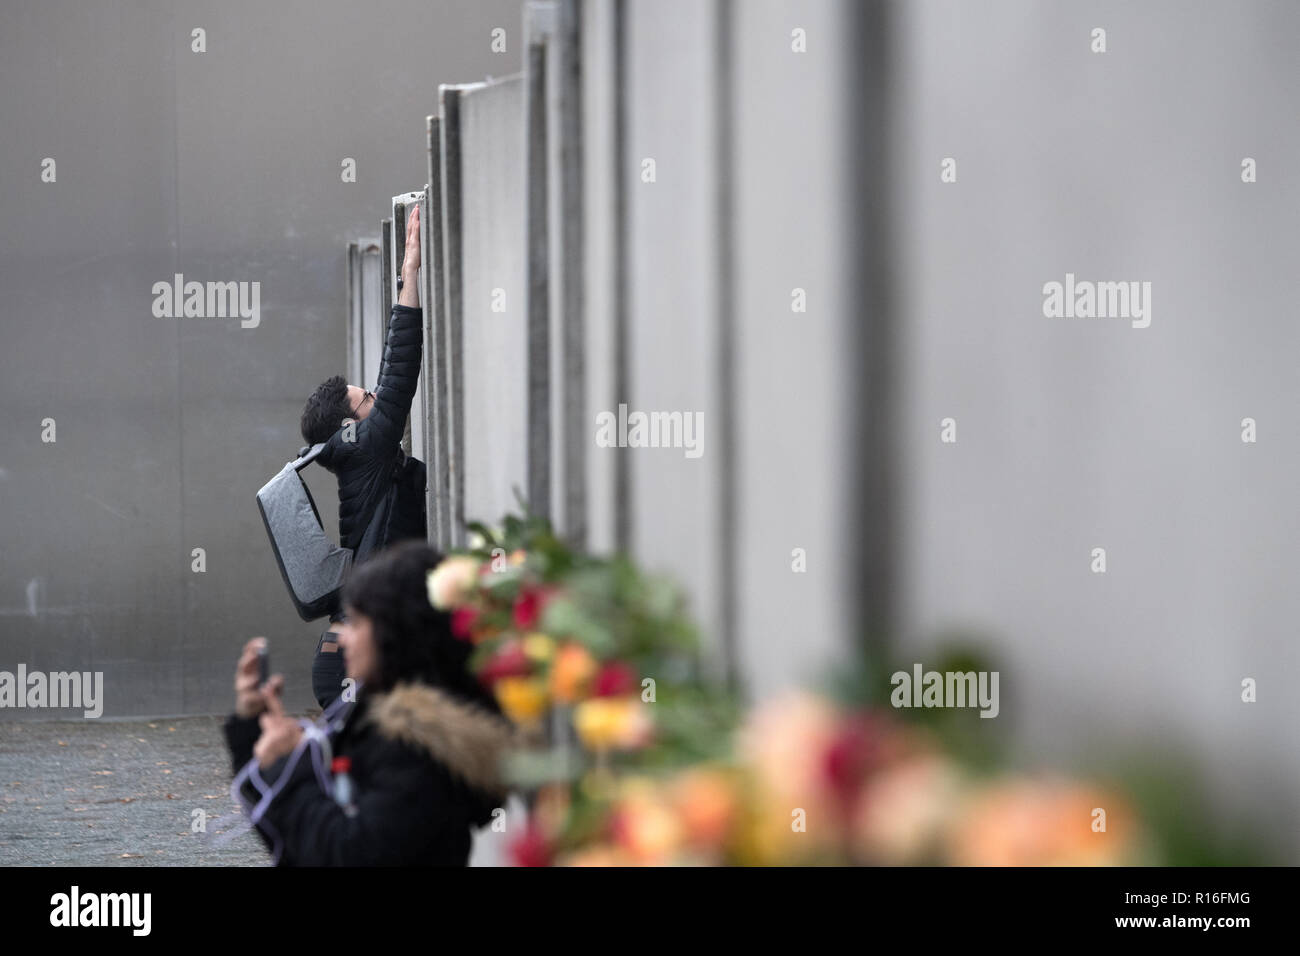 Berlin, Germany. 09th Nov, 2018. People place roses at the Berlin Wall Memorial during a commemoration ceremony marking the 29th anniversary of the Berlin Wall fall. Credit: Ralf Hirschberger/dpa/Alamy Live News Stock Photo